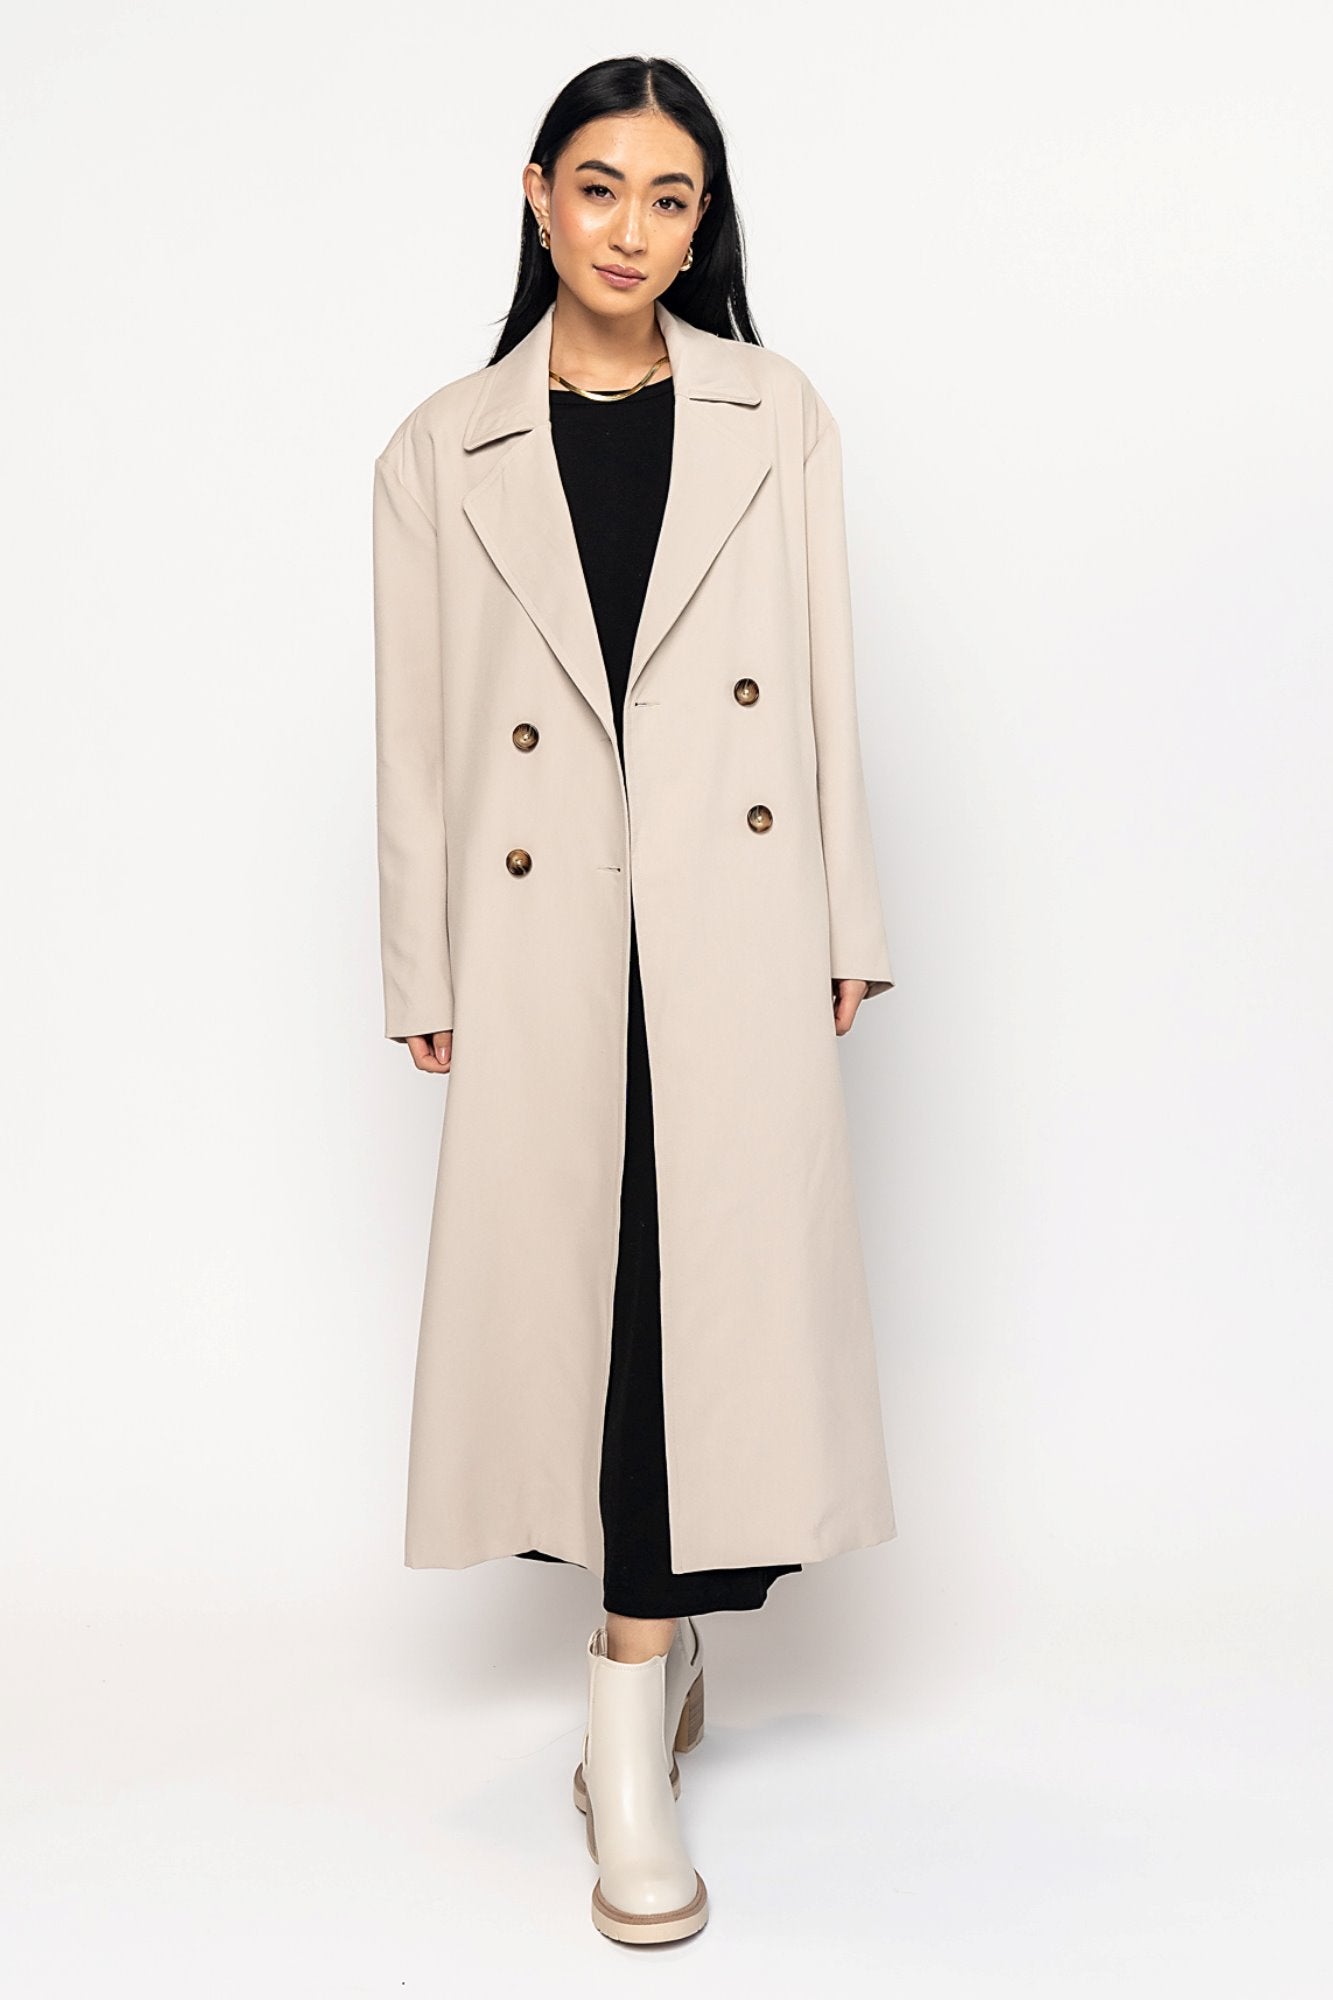 Enzo Trench Coat in Cream Holley Girl 